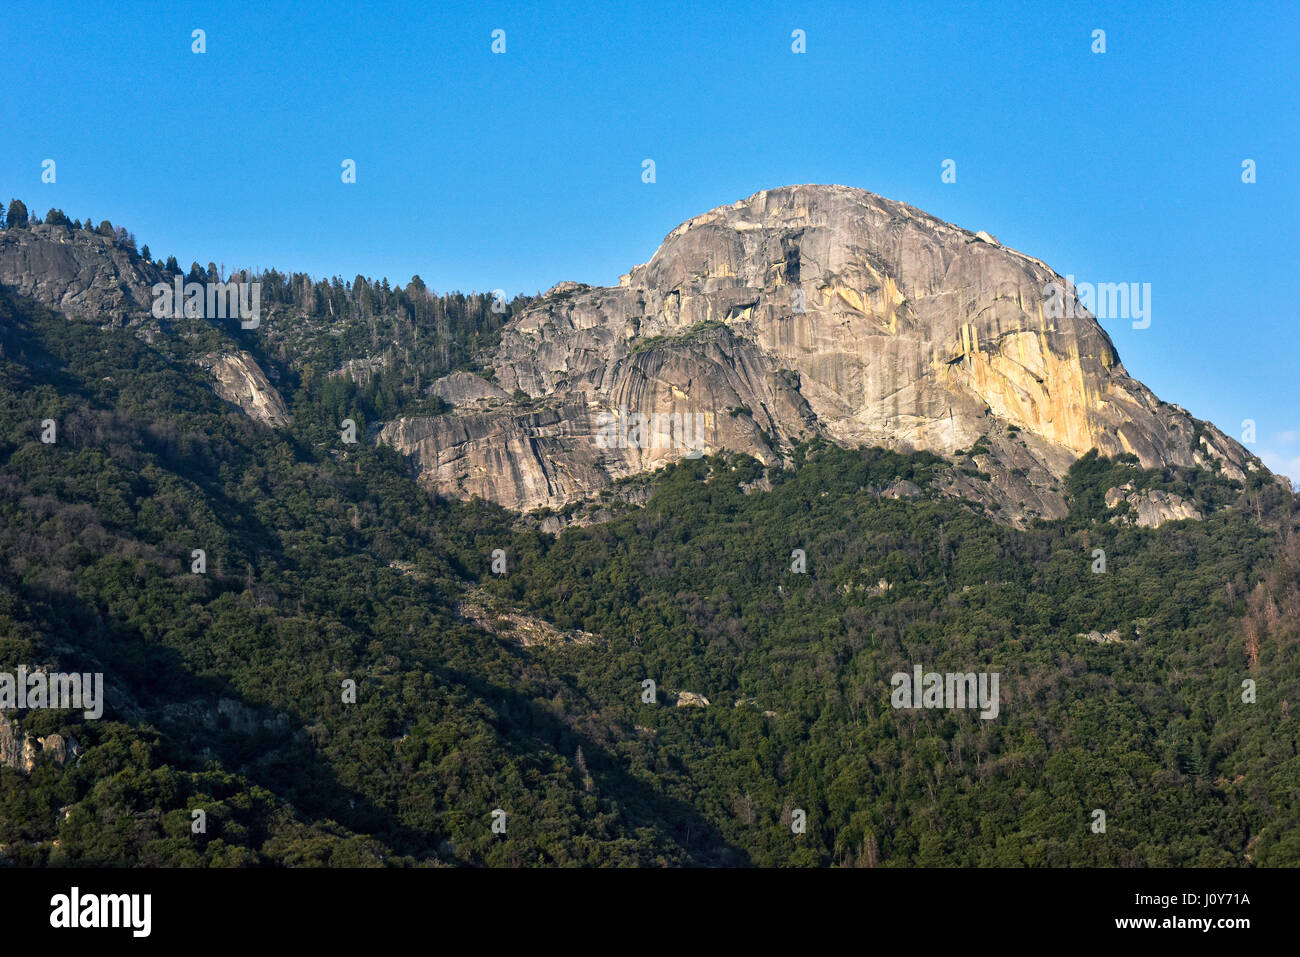 Moro Rock is a granite dome rock formation in Sequoia National Park, California, United States. Stock Photo